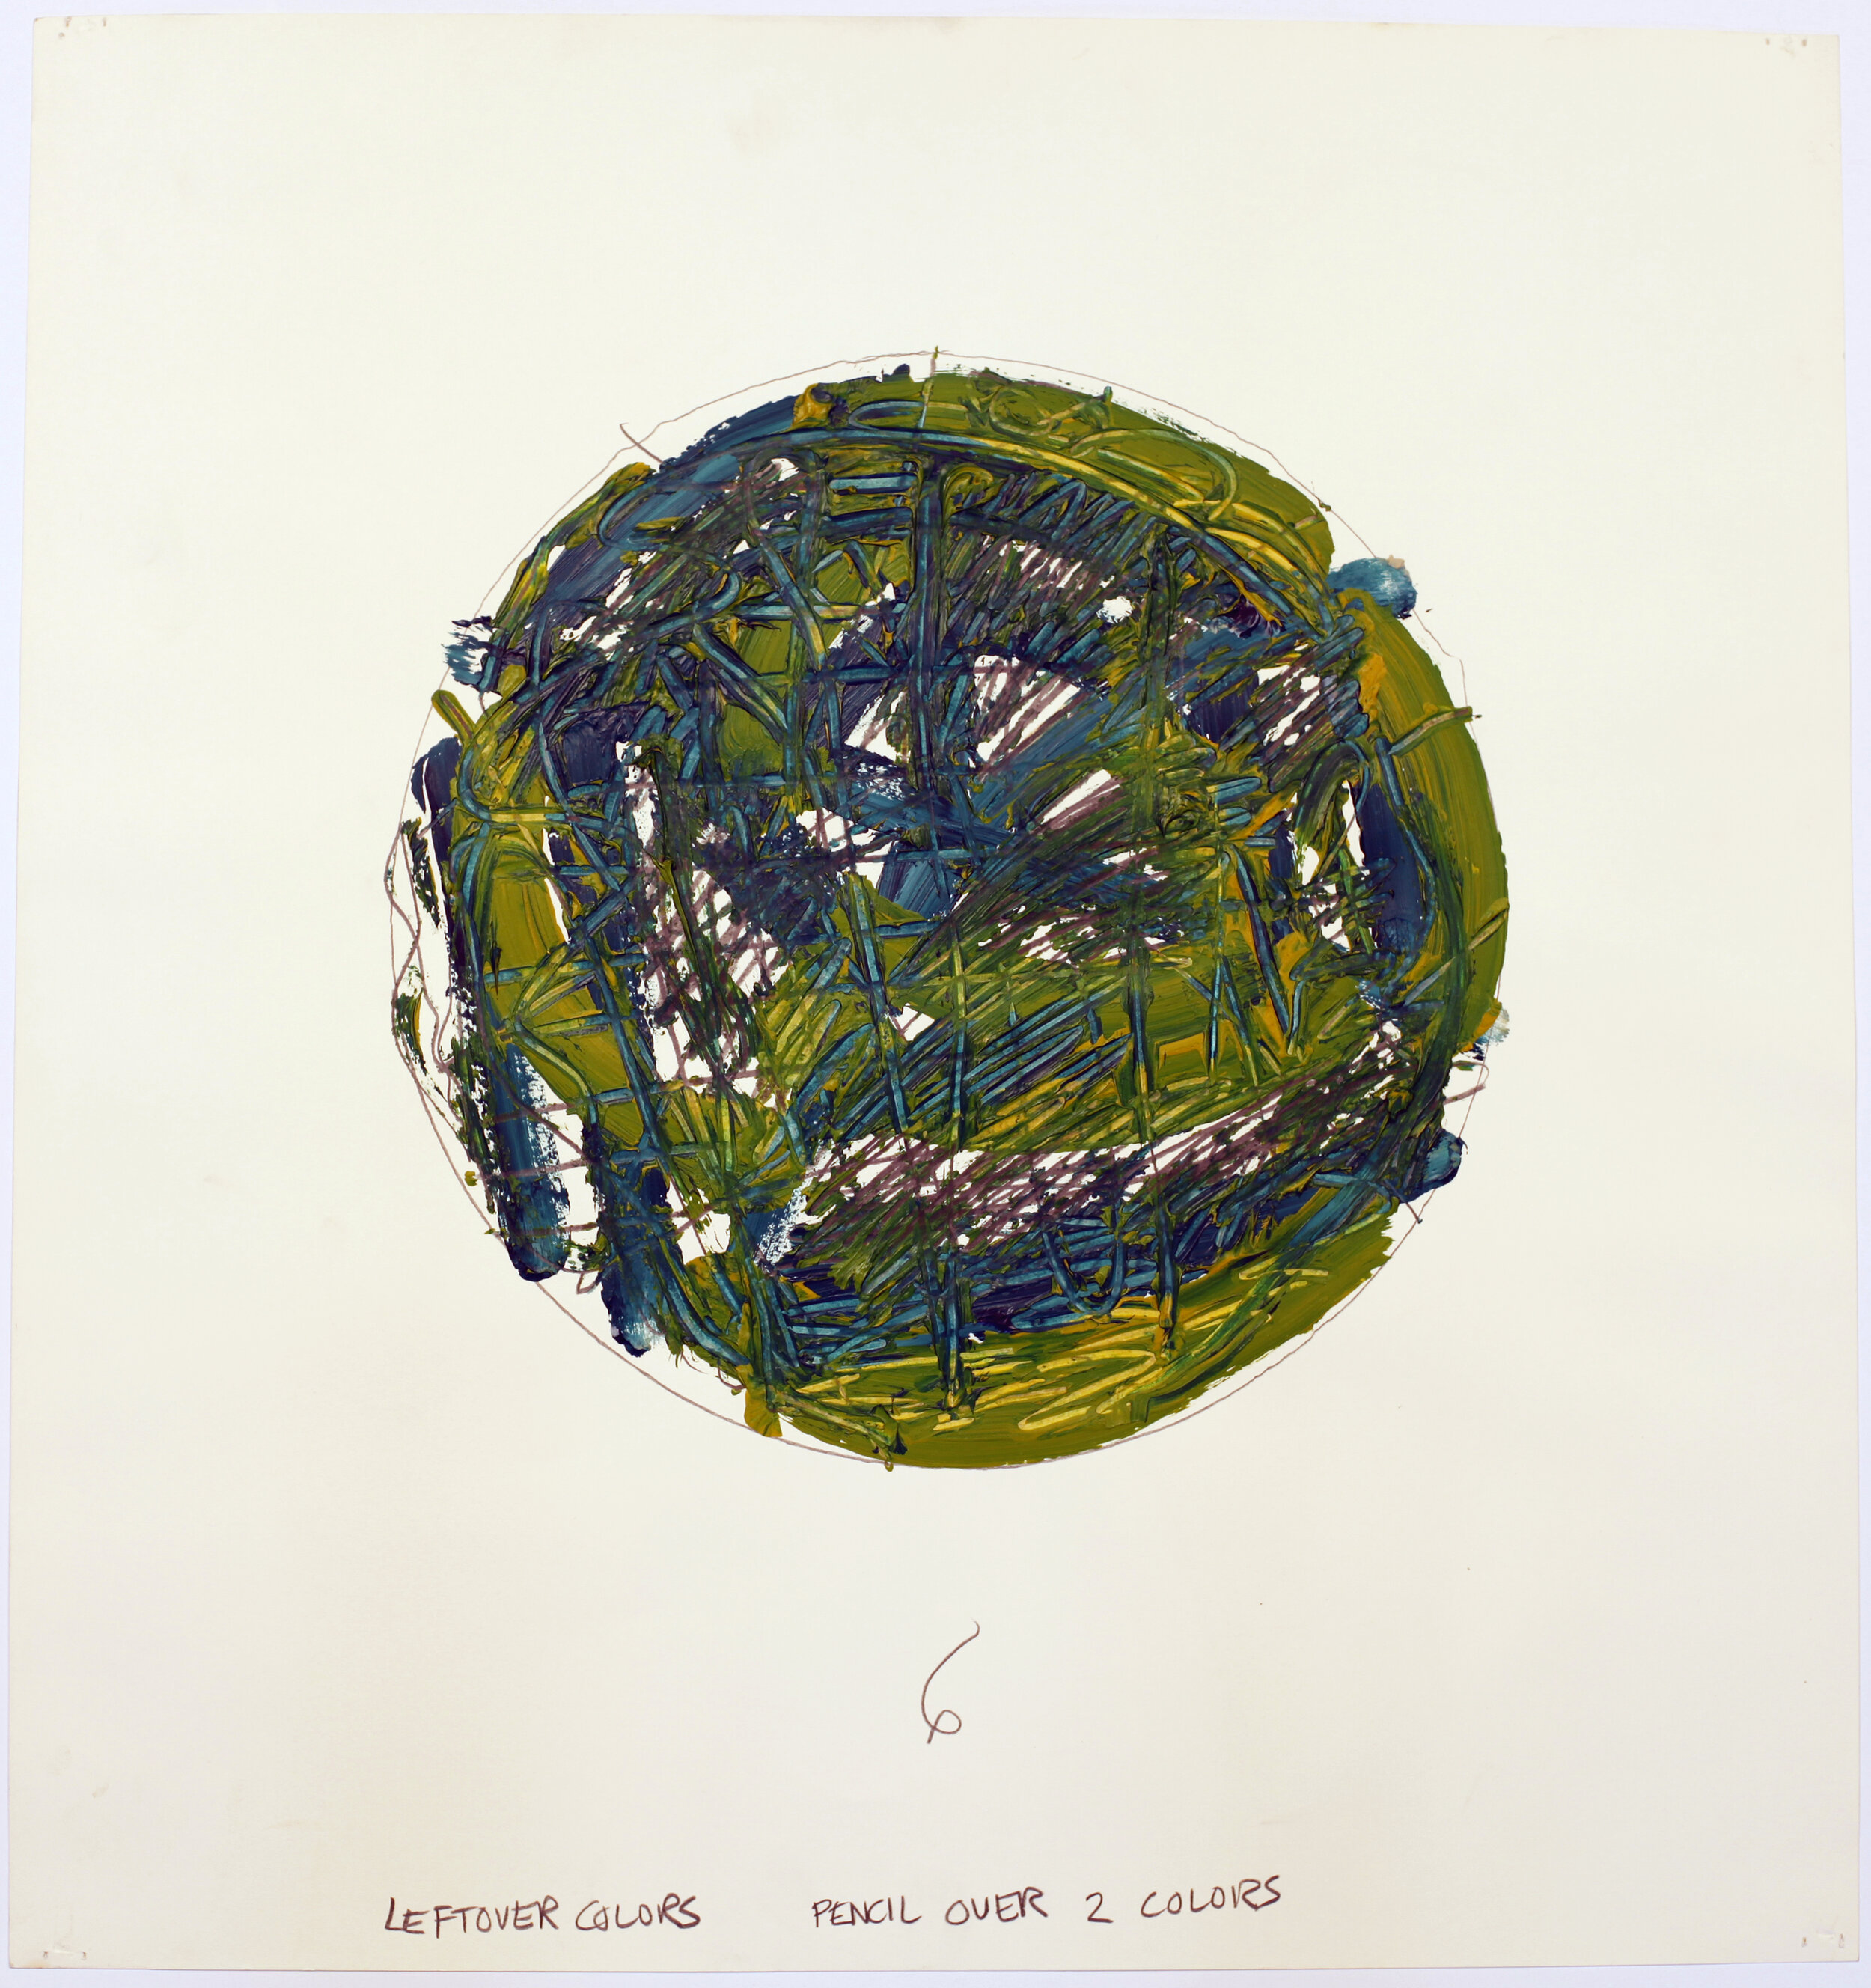  Louise Fishman, “Pencil over 2 Colors,” from&nbsp; Leftover Colors , 1974. Acrylic on paper. 18 ¾ x 20 inches.&nbsp;Courtesy of the artist.&nbsp;© Louise Fishman 